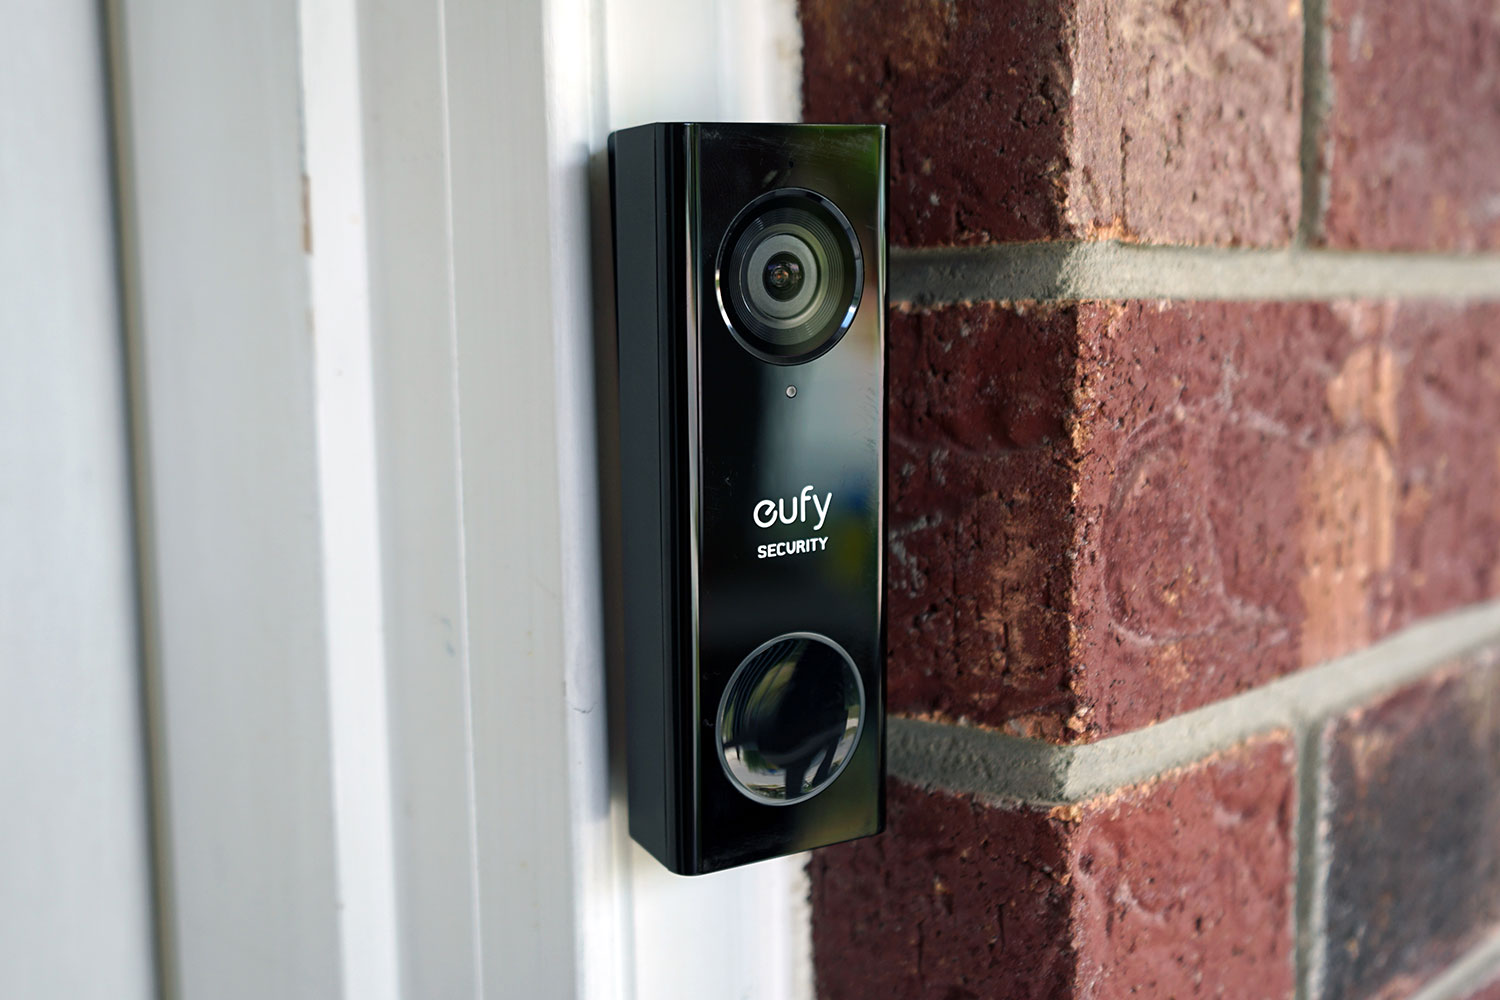 Eufy Video Doorbell 2K review: Lots on offer but some performance